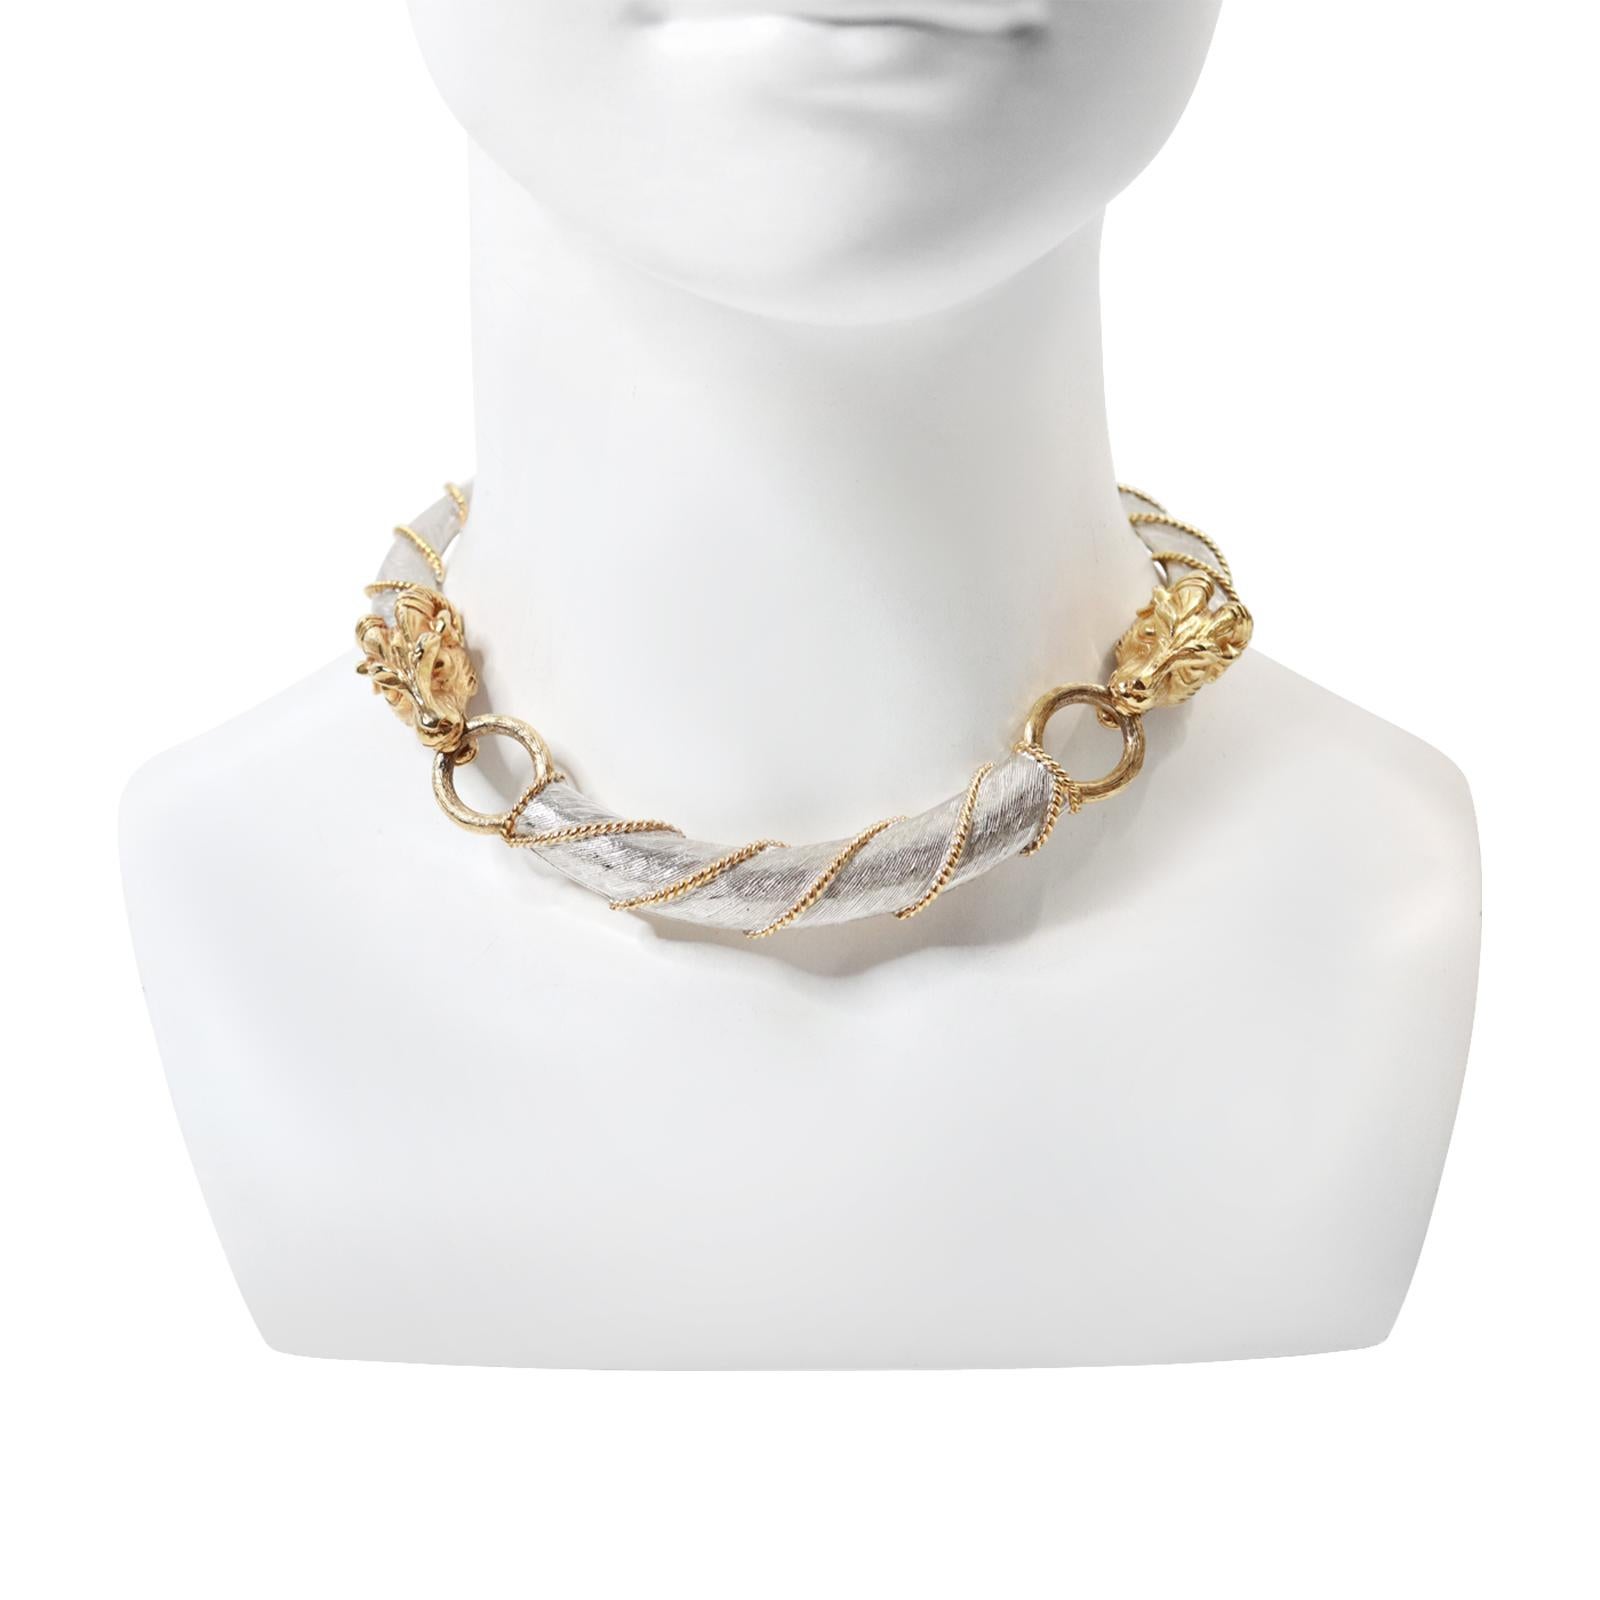 Modern Vintage Donald Stannard Rams Head Choker in Silver and Gold Circa 1980s For Sale